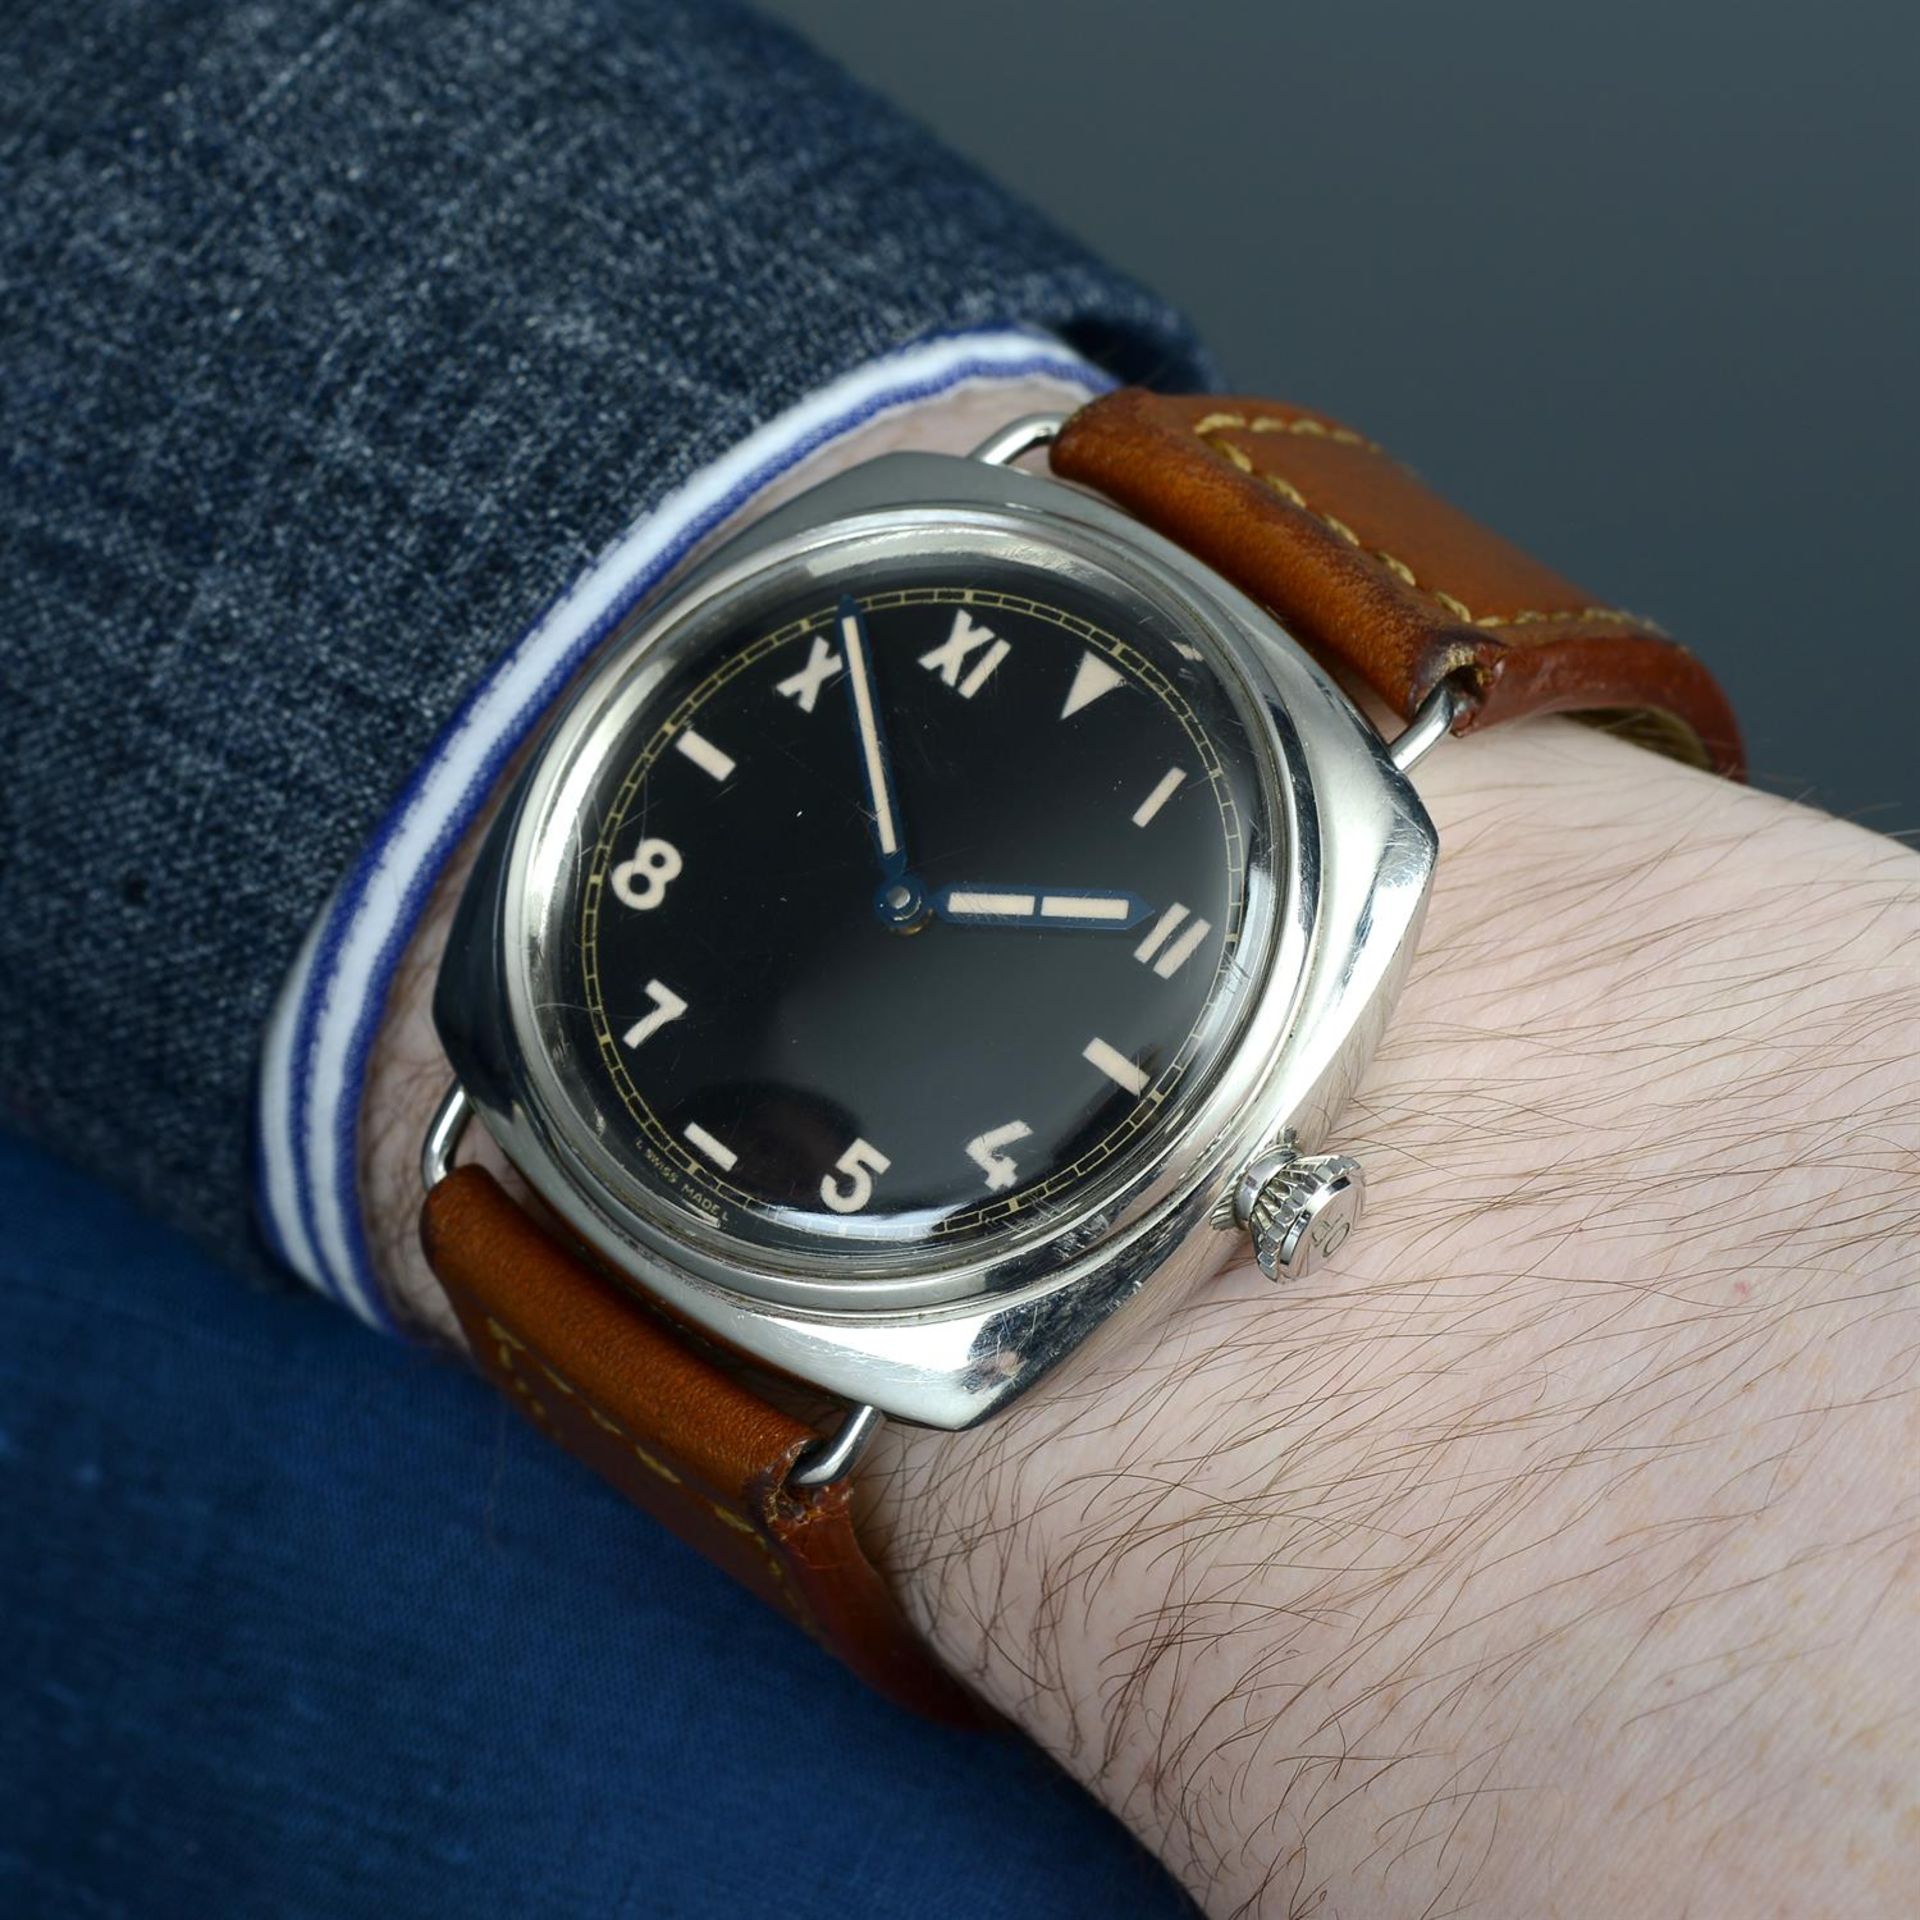 PANERAI - a limited edition stainless steel Radiomir California wrist watch, 47mm. - Image 5 of 6